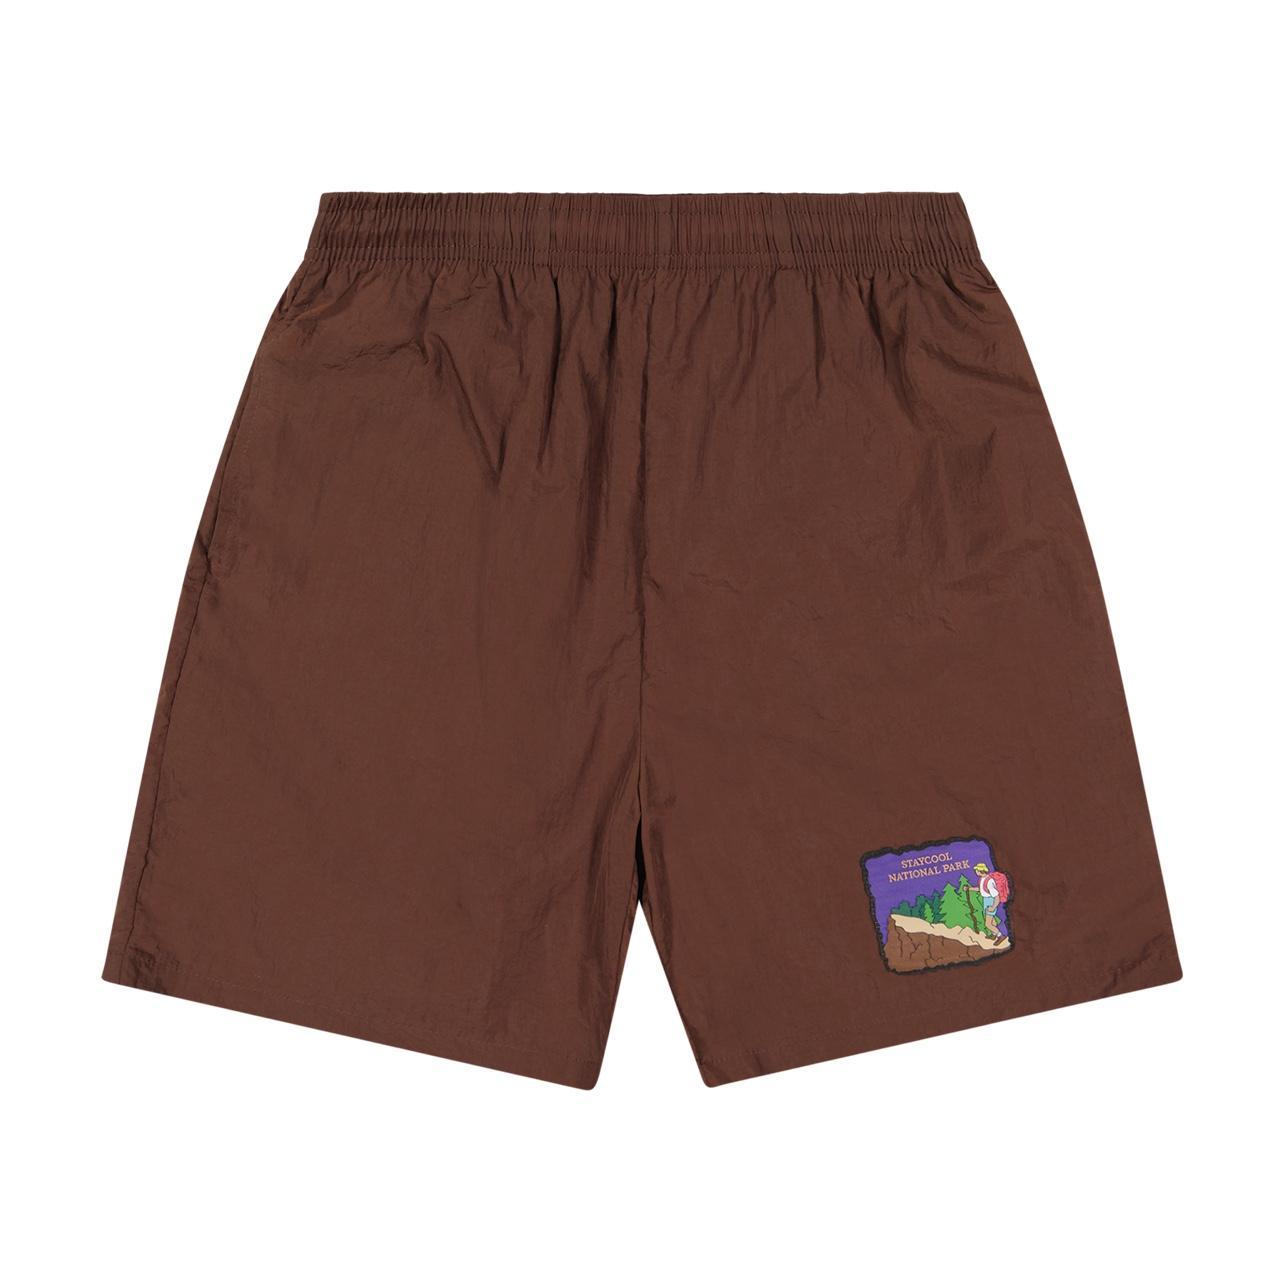 STAY COOL NYC Men's Brown Shorts (3)